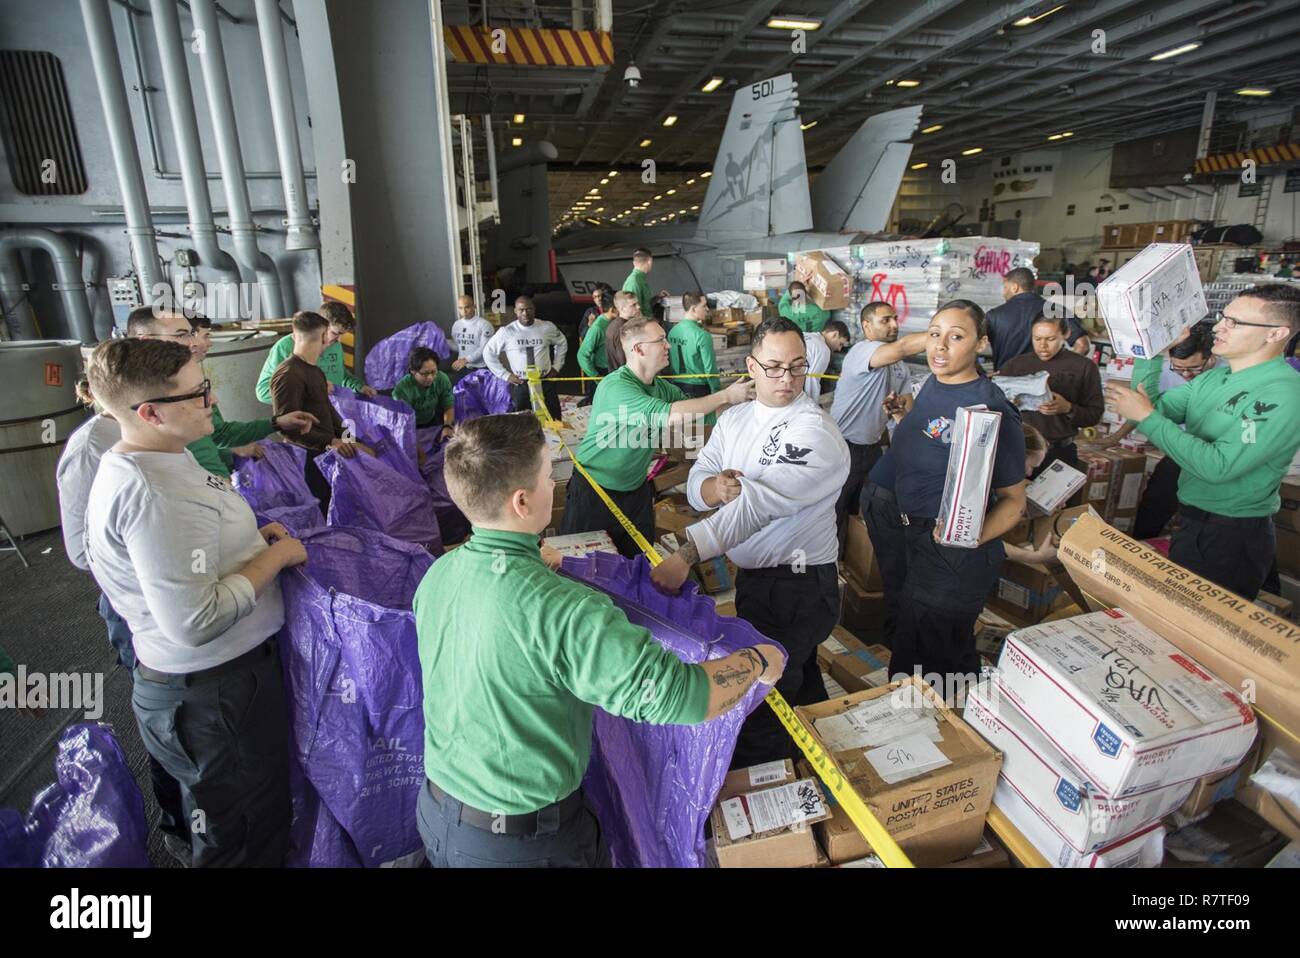 ARABIAN GULF (April 5, 2017) Sailors distribute mail in the hangar bay aboard the aircraft carrier USS George H.W. Bush (CVN 77) (GHWB). GHWB is deployed in the U.S. 5th Fleet area of operations in support of maritime security operations designed to reassure allies and partners, and preserve the freedom of navigation and the free flow of commerce in the region. Stock Photo